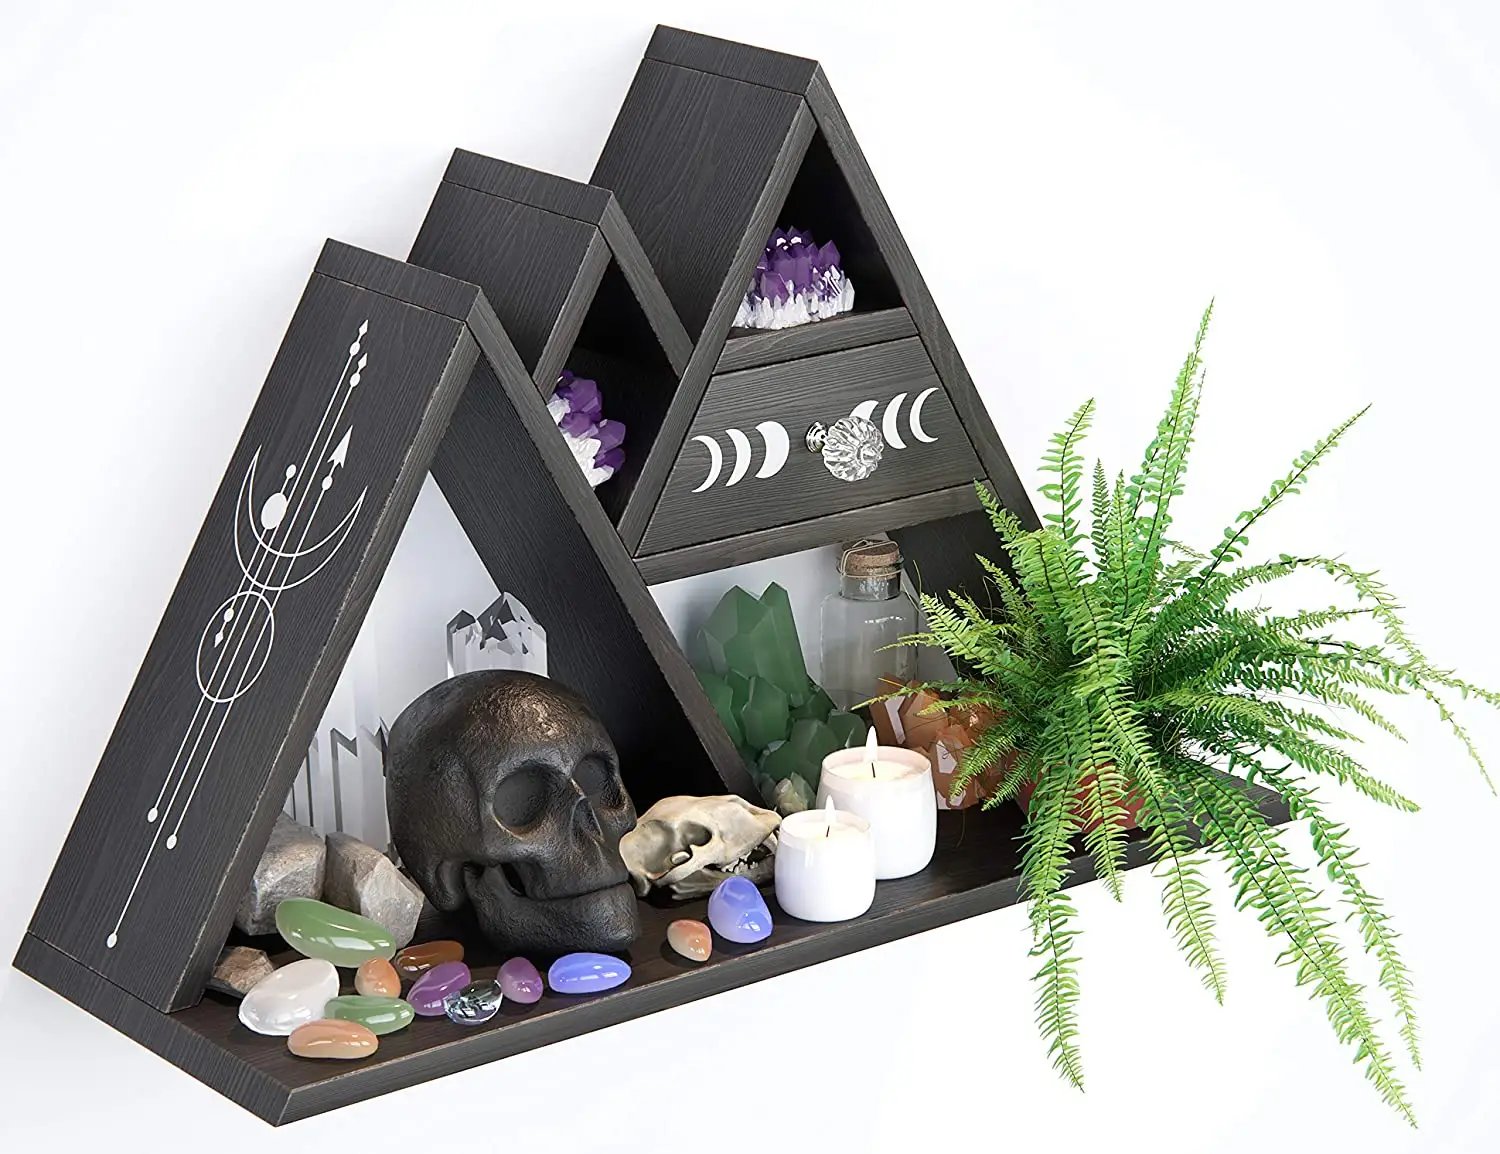 Mountain Shelf Wall Decor | Wooden Crystal Shelf Display for Stones. Mountain Shelves can be Used as Witchy Room Deco